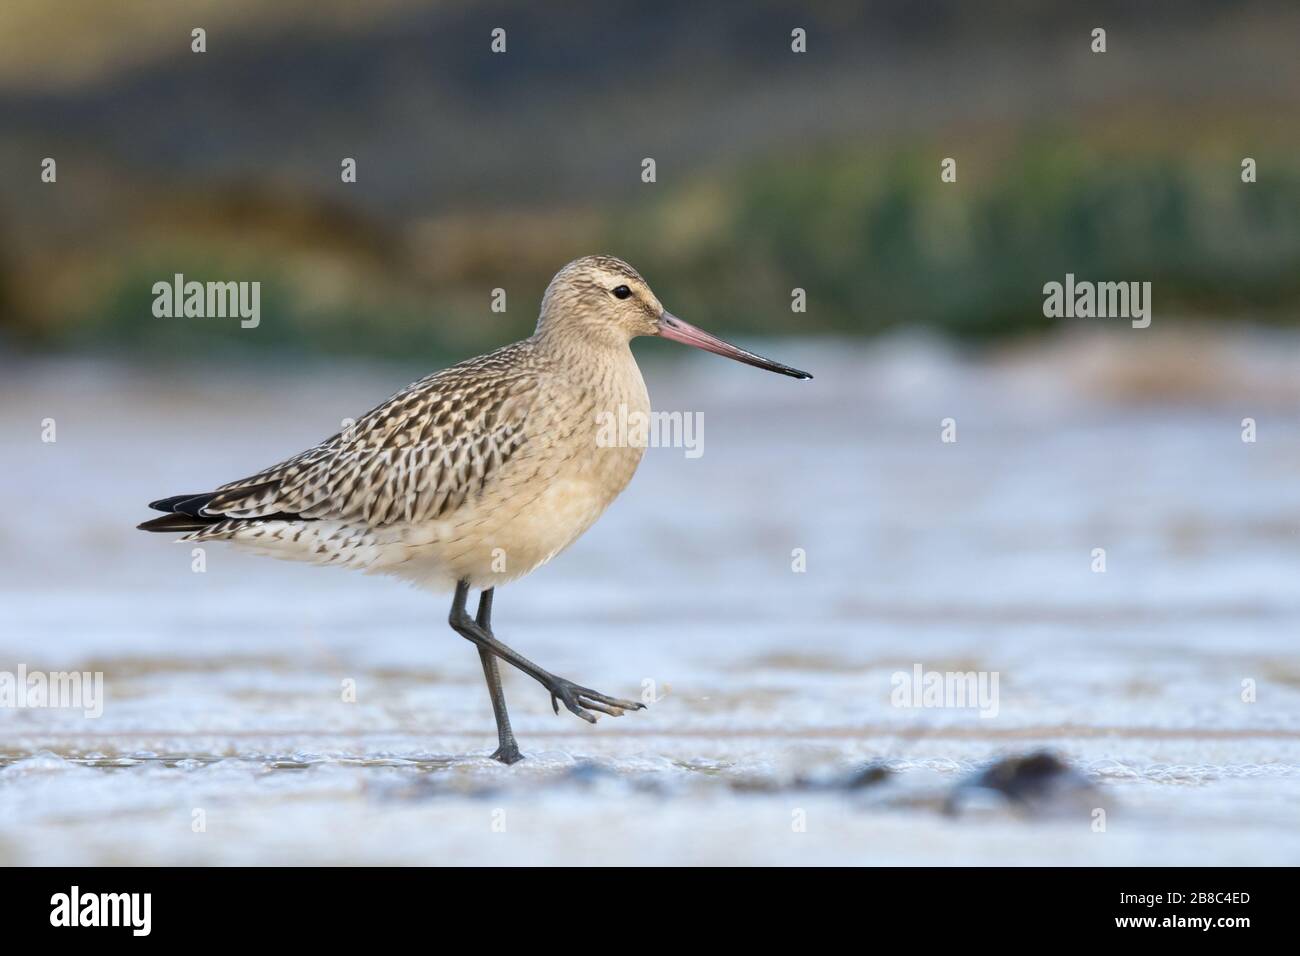 Bar-tailed godwit (Limosa lapponica), juvenile standing on the sandy beach against the backdrop of foamed water. Baltic Sea, Poland Stock Photo